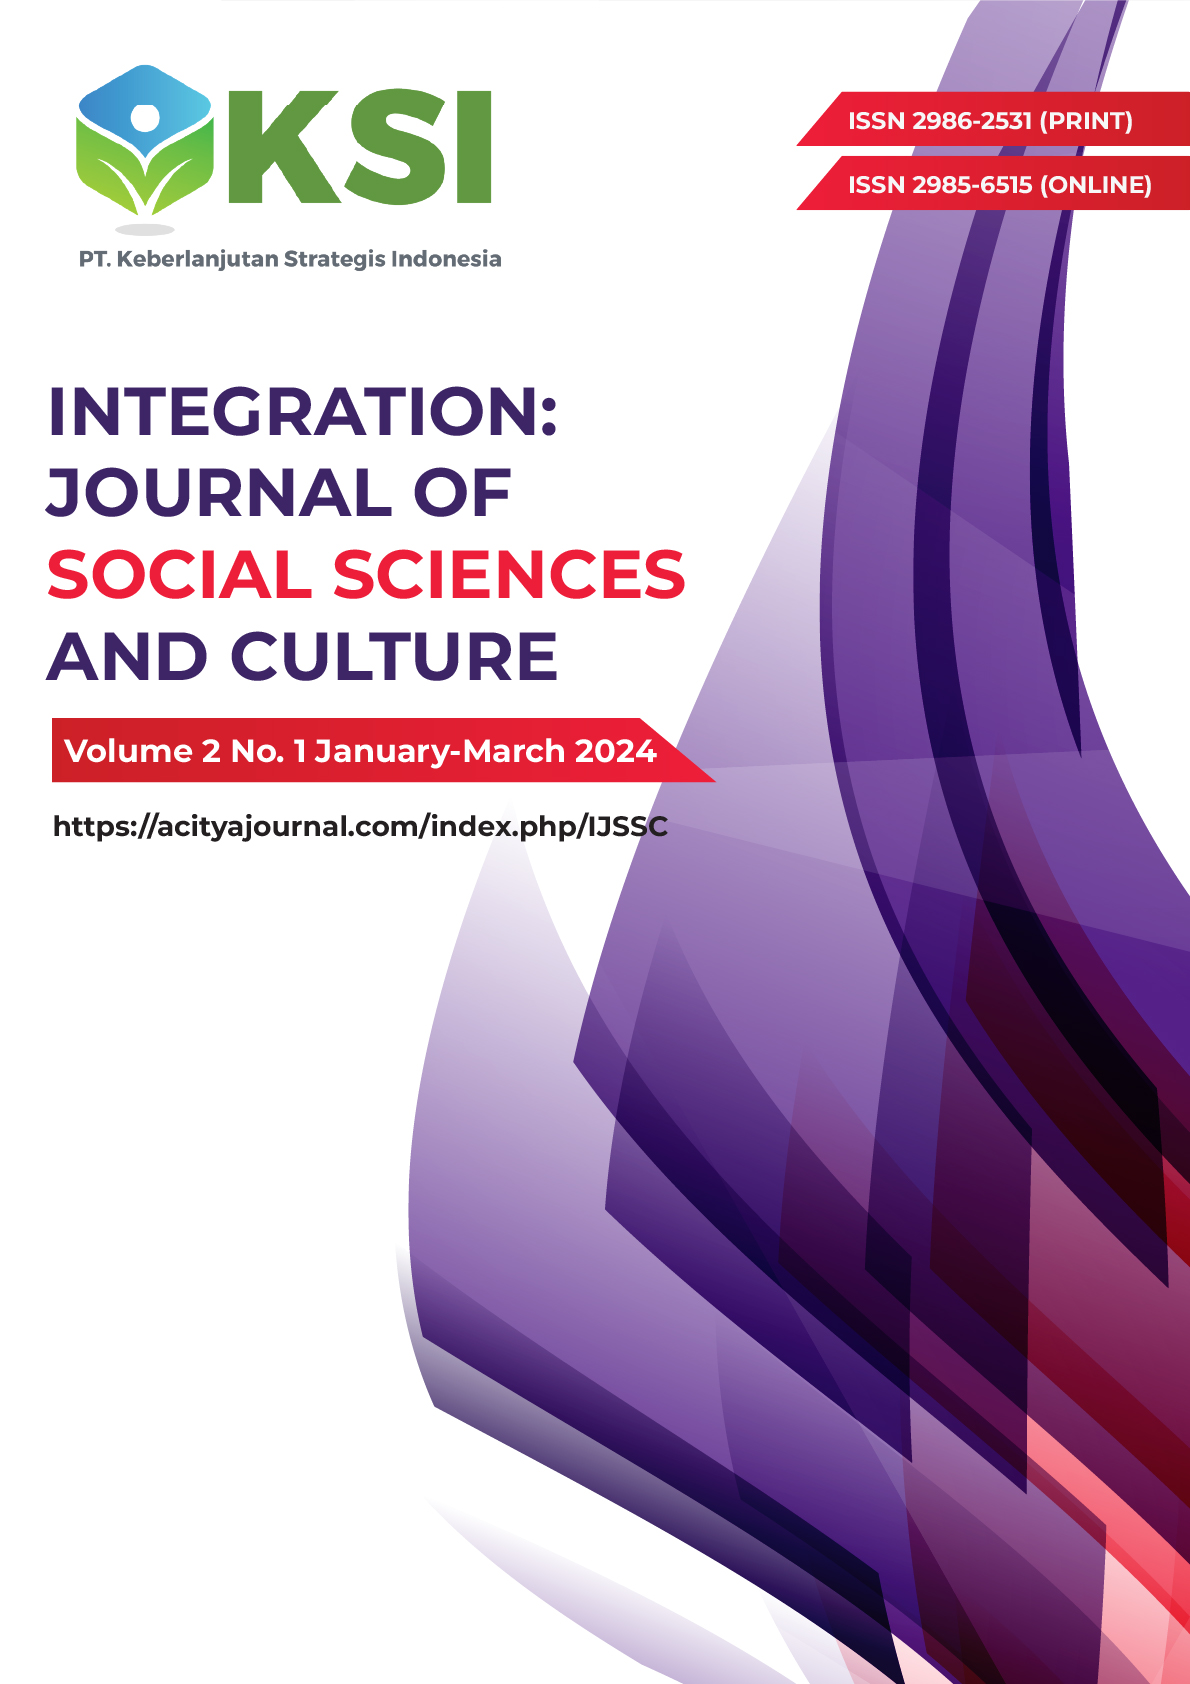 					View Vol. 2 No. 1 (2024): Integration: Journal Of Social Sciences And Culture (January – March)-In Press
				